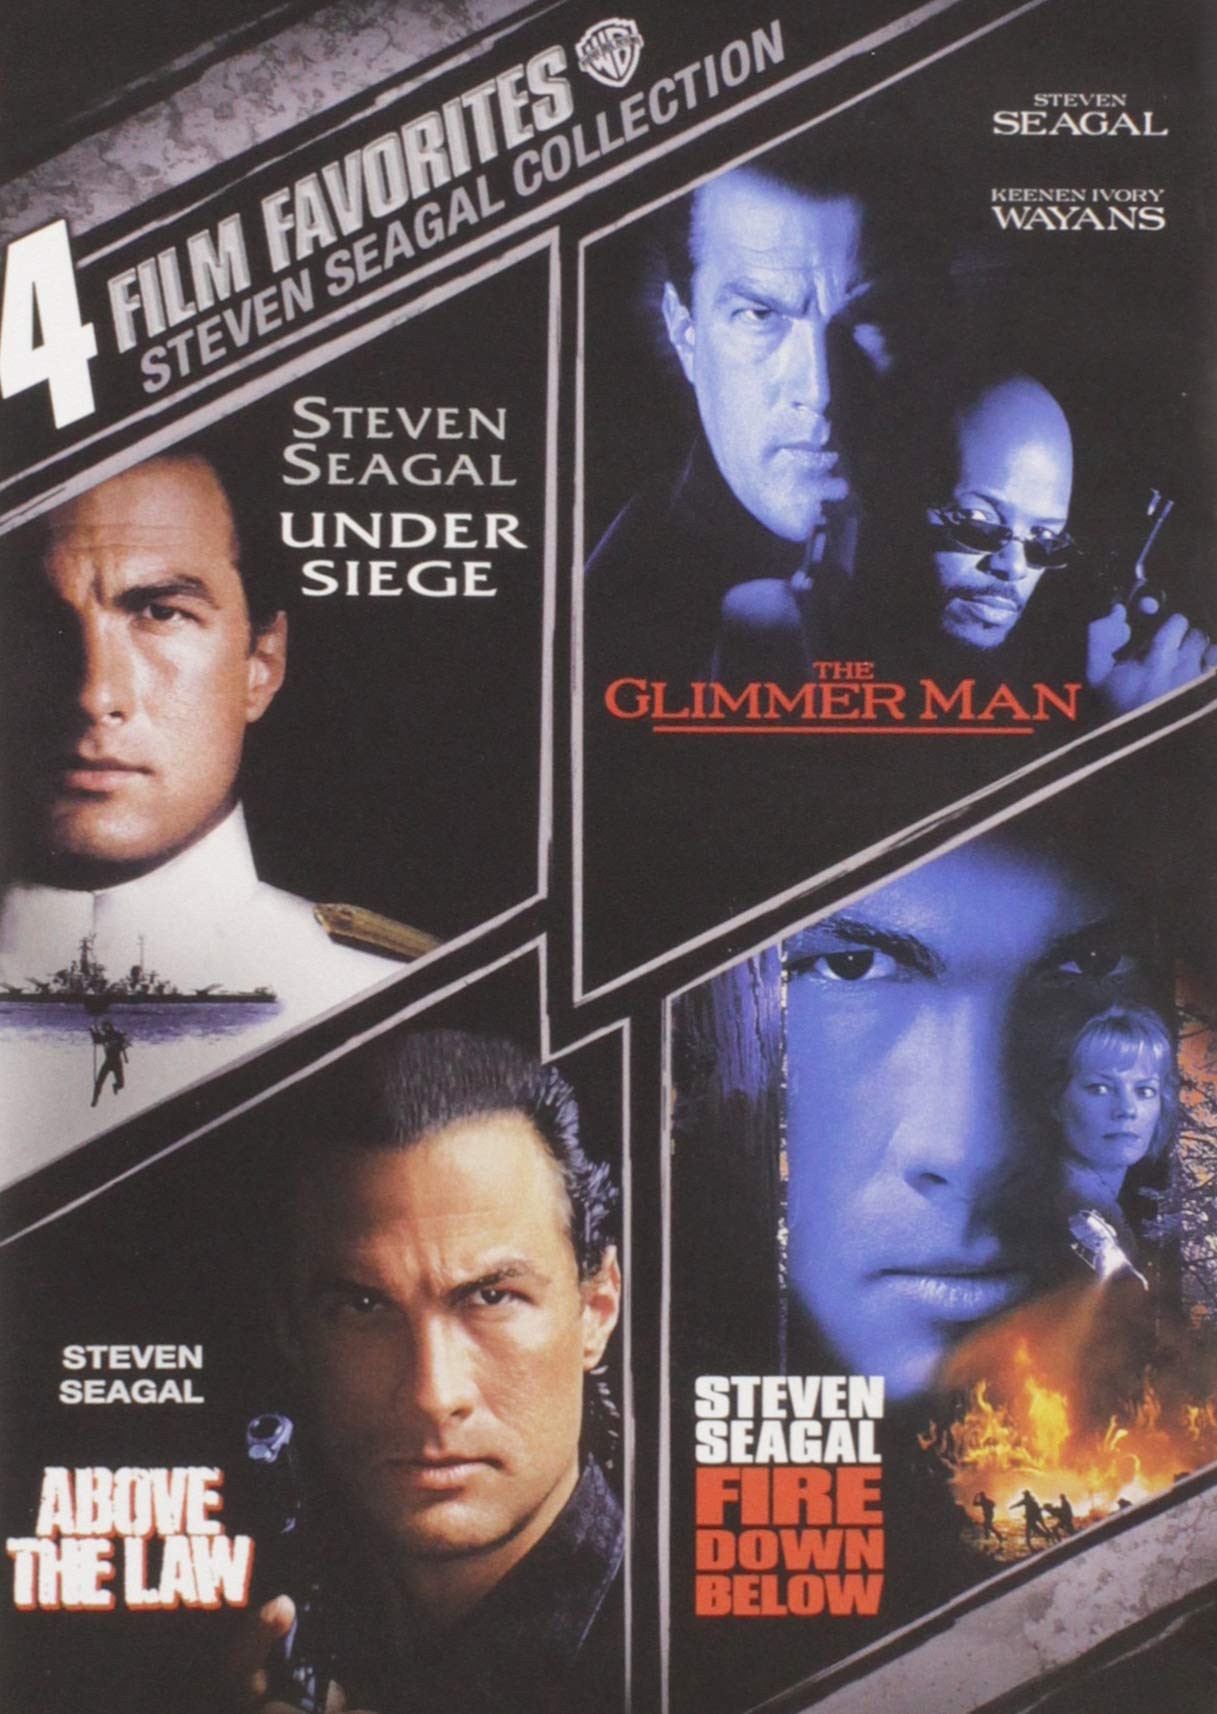 Book Cover 4 Film Favorites: Steven Seagal (Above the Law, Fire Down Below, The Glimmer Man, Under Siege)